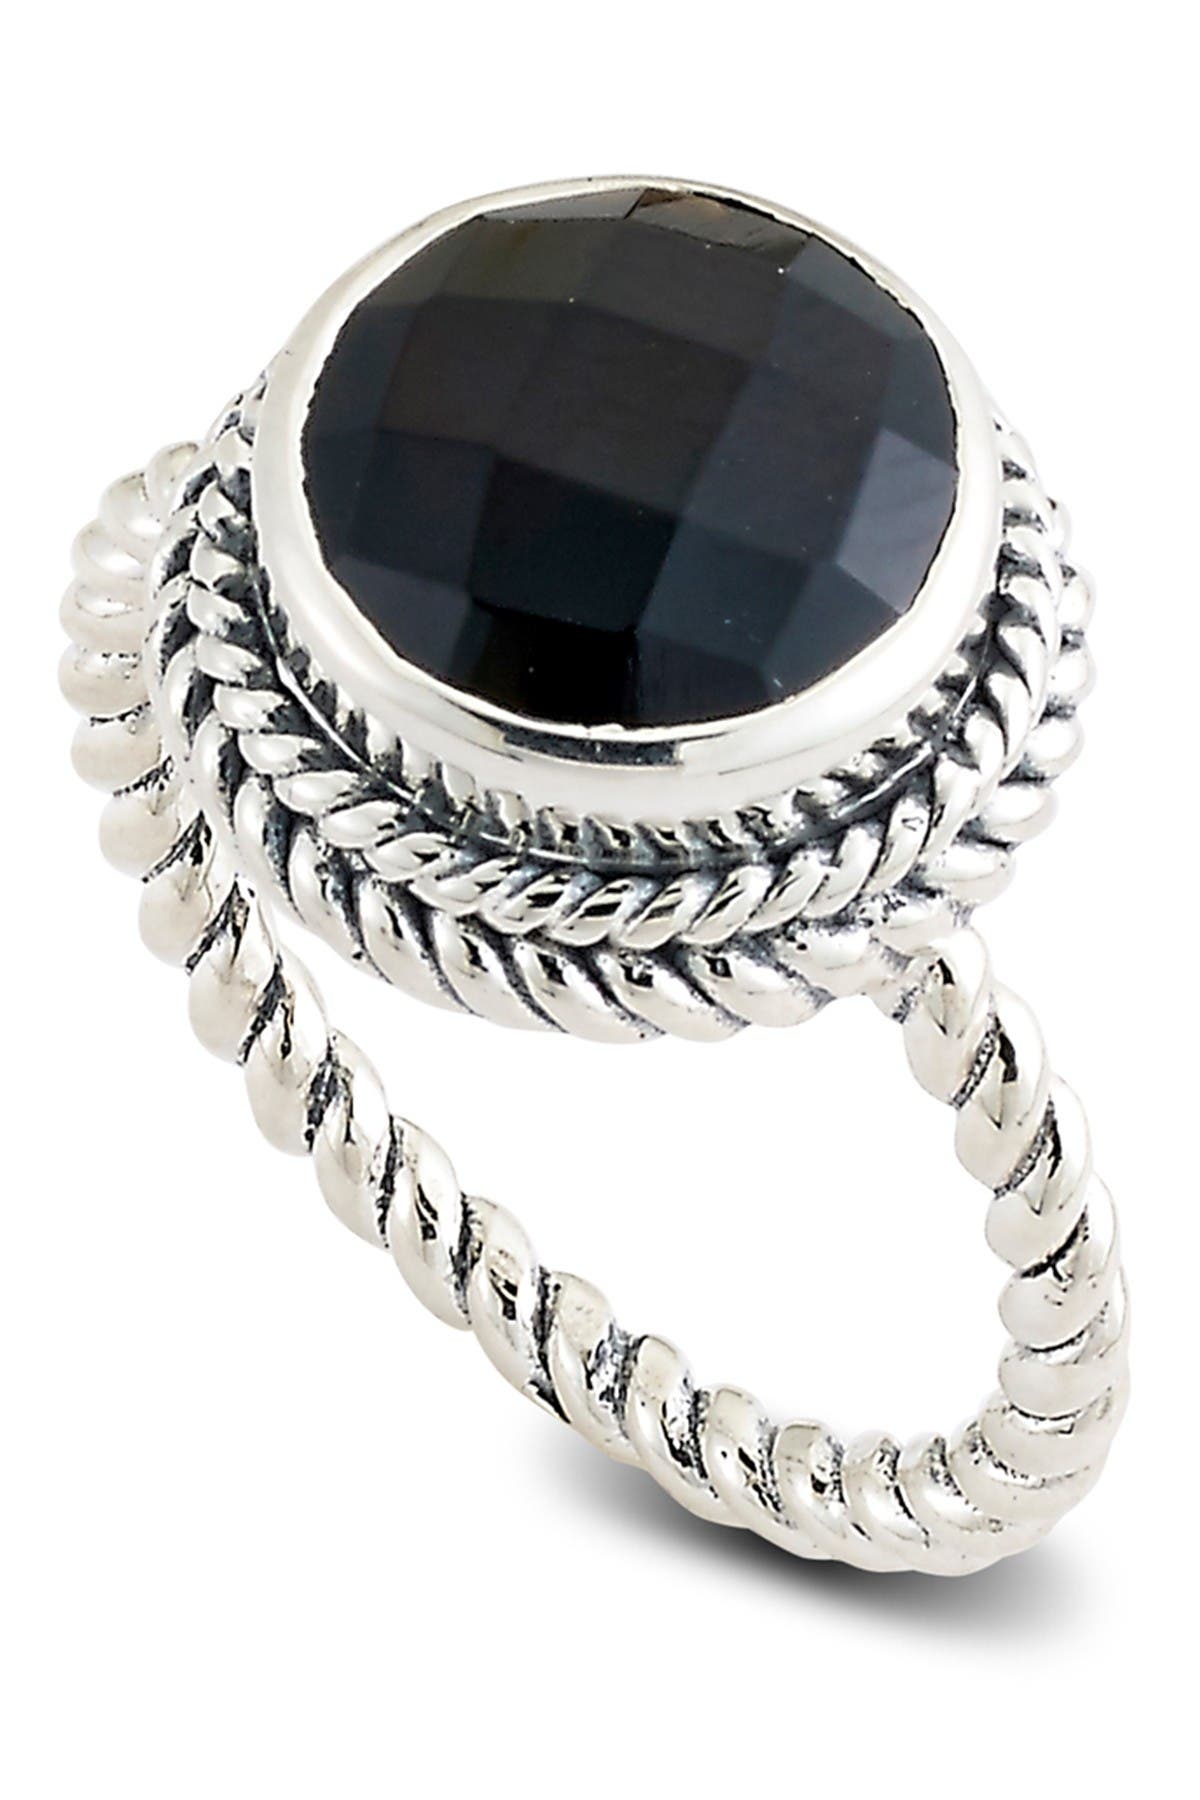 8mm Round Black Onyx Ring Solid 925 Sterling Silver Antique Vintage Style Ball Bead Band Crown Prongs